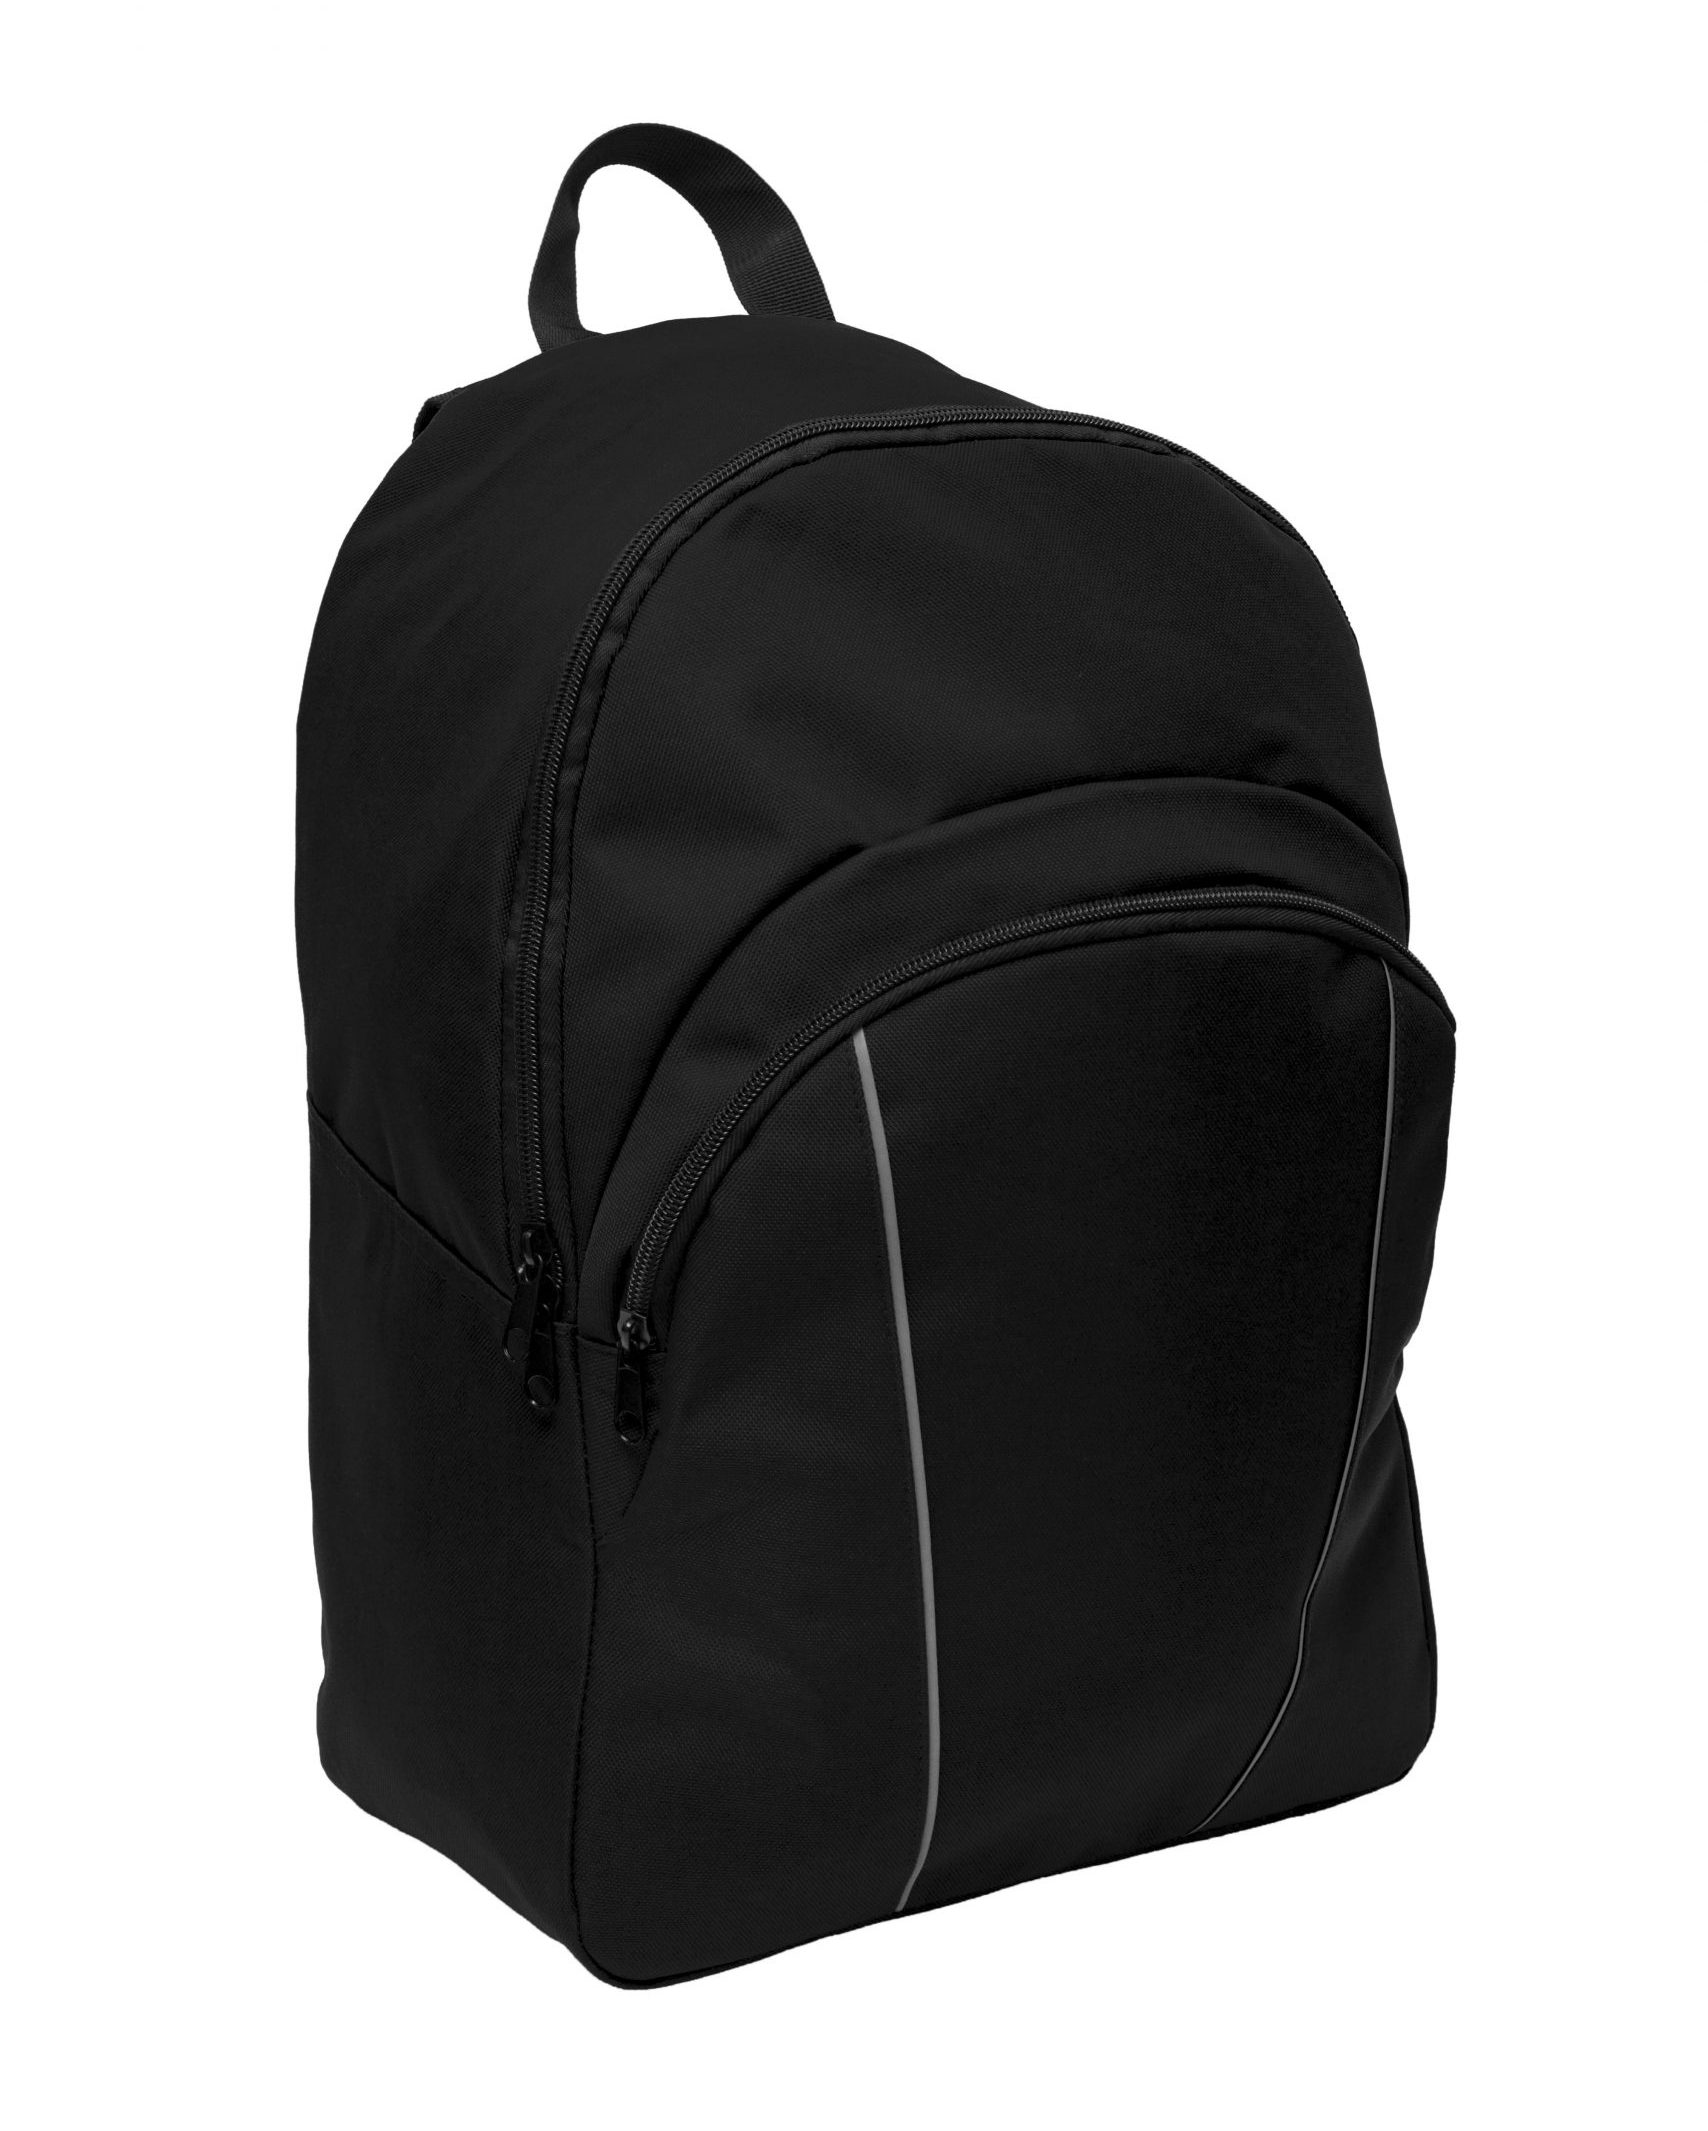 compartment backpack printing